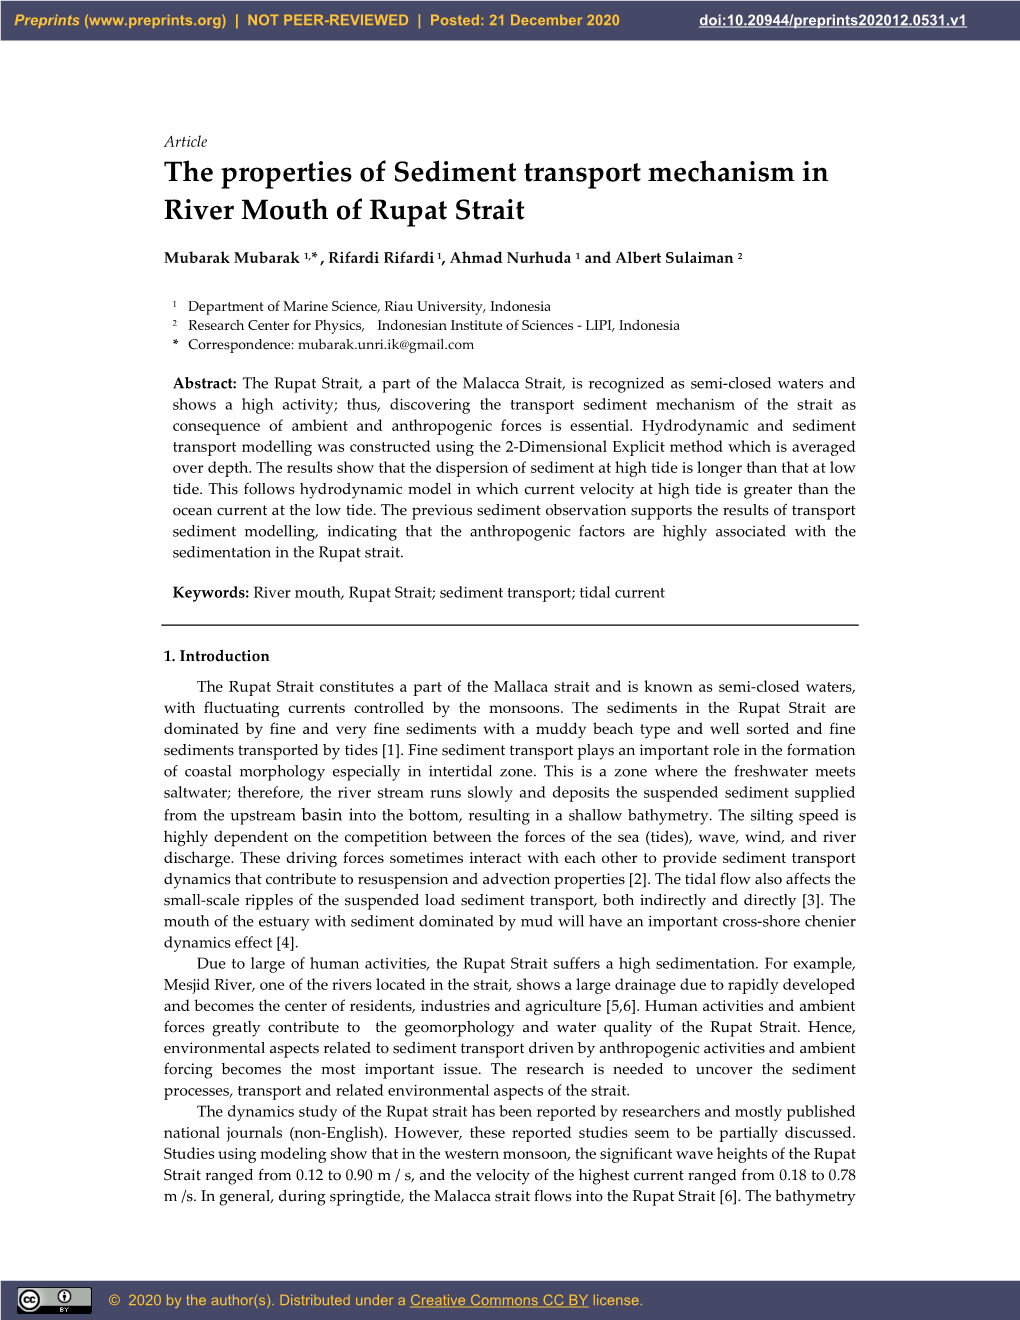 The Properties of Sediment Transport Mechanism in River Mouth of Rupat Strait